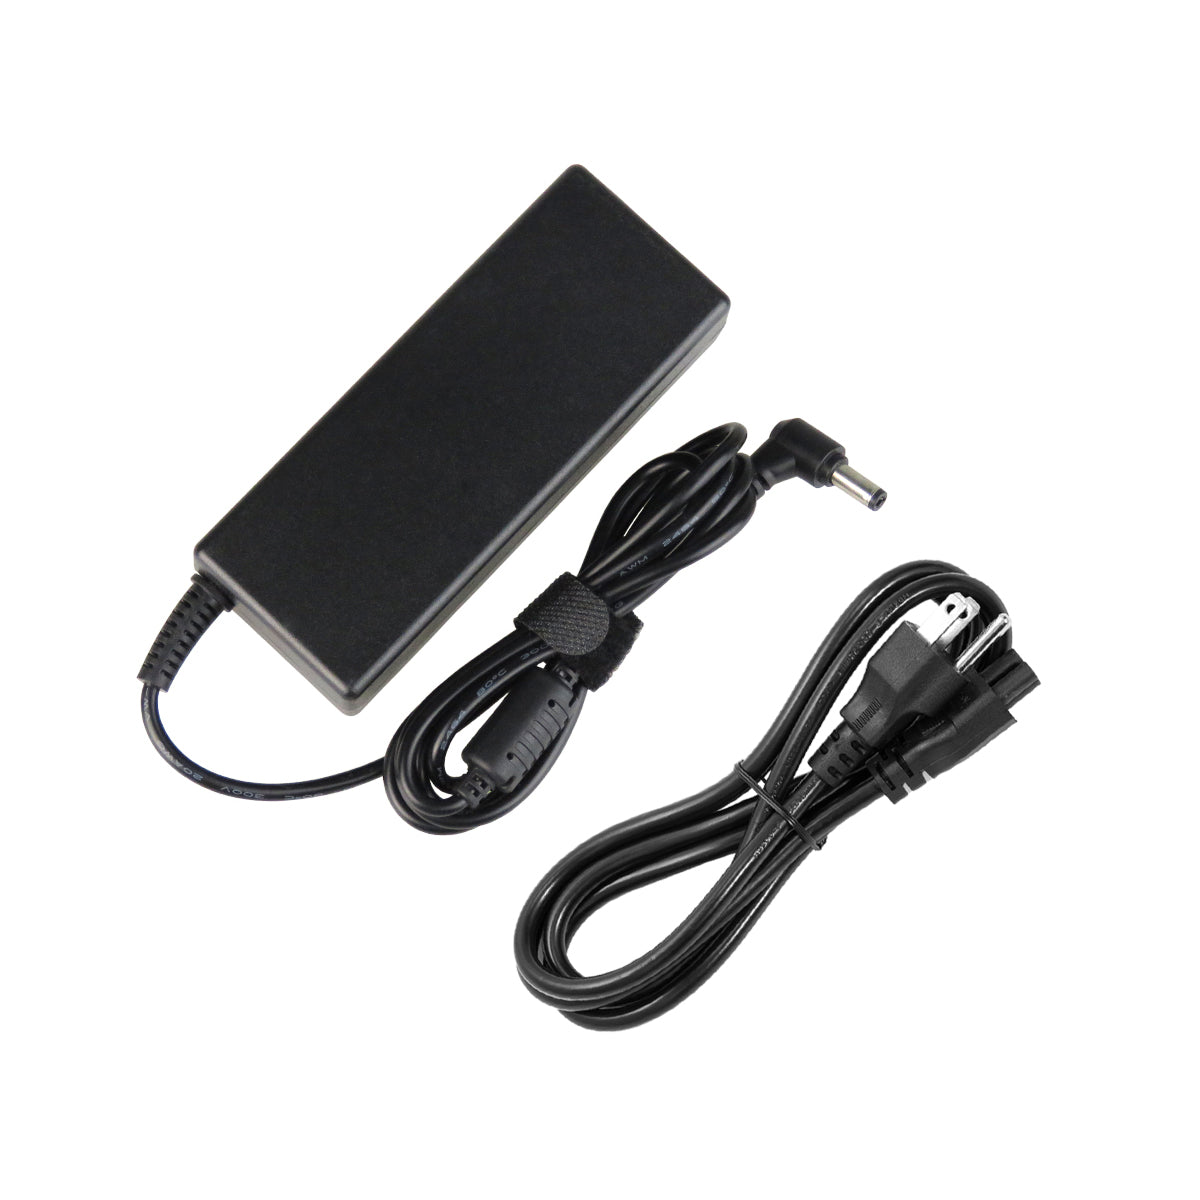 AC Adapter Charger for ASUS U56 Notebook.